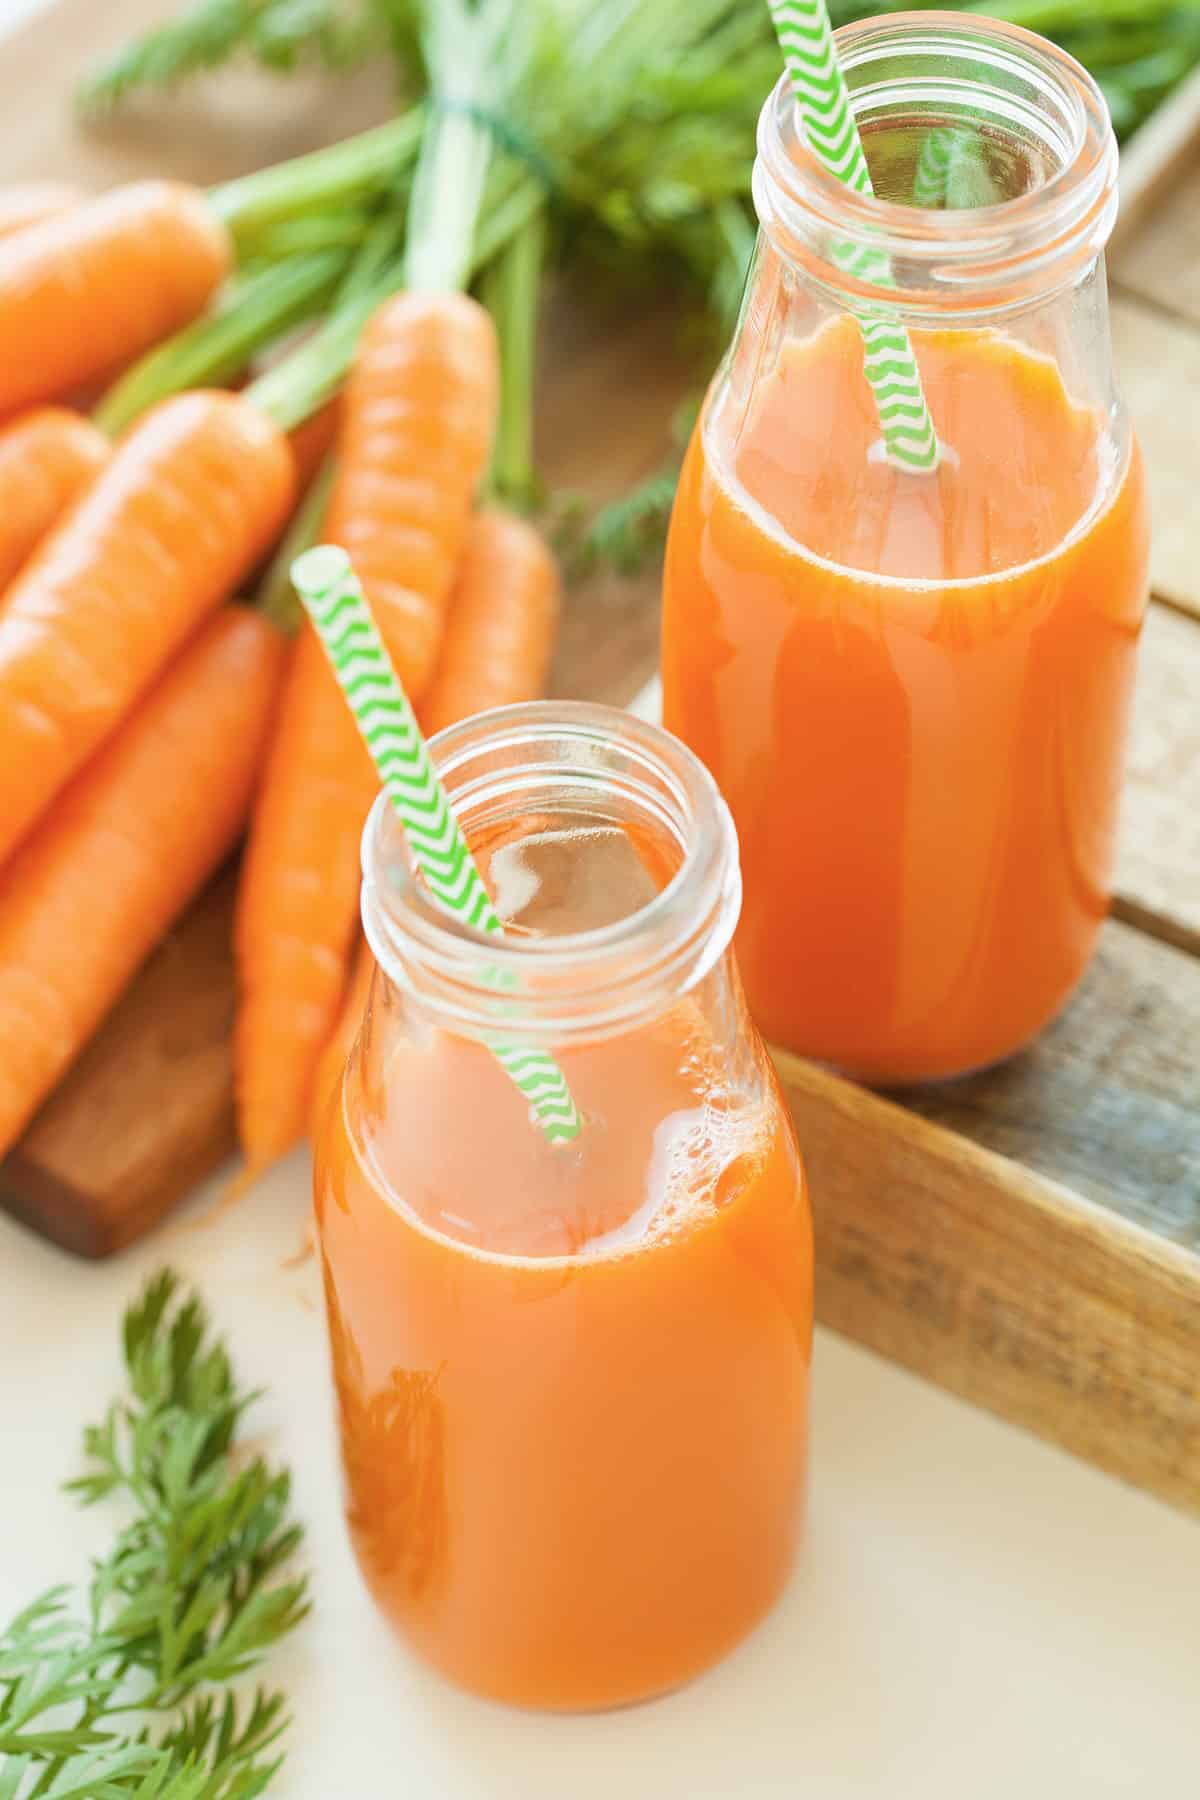 carrot juice  in glass bottles with green striped straws and fresh  carrots in the background